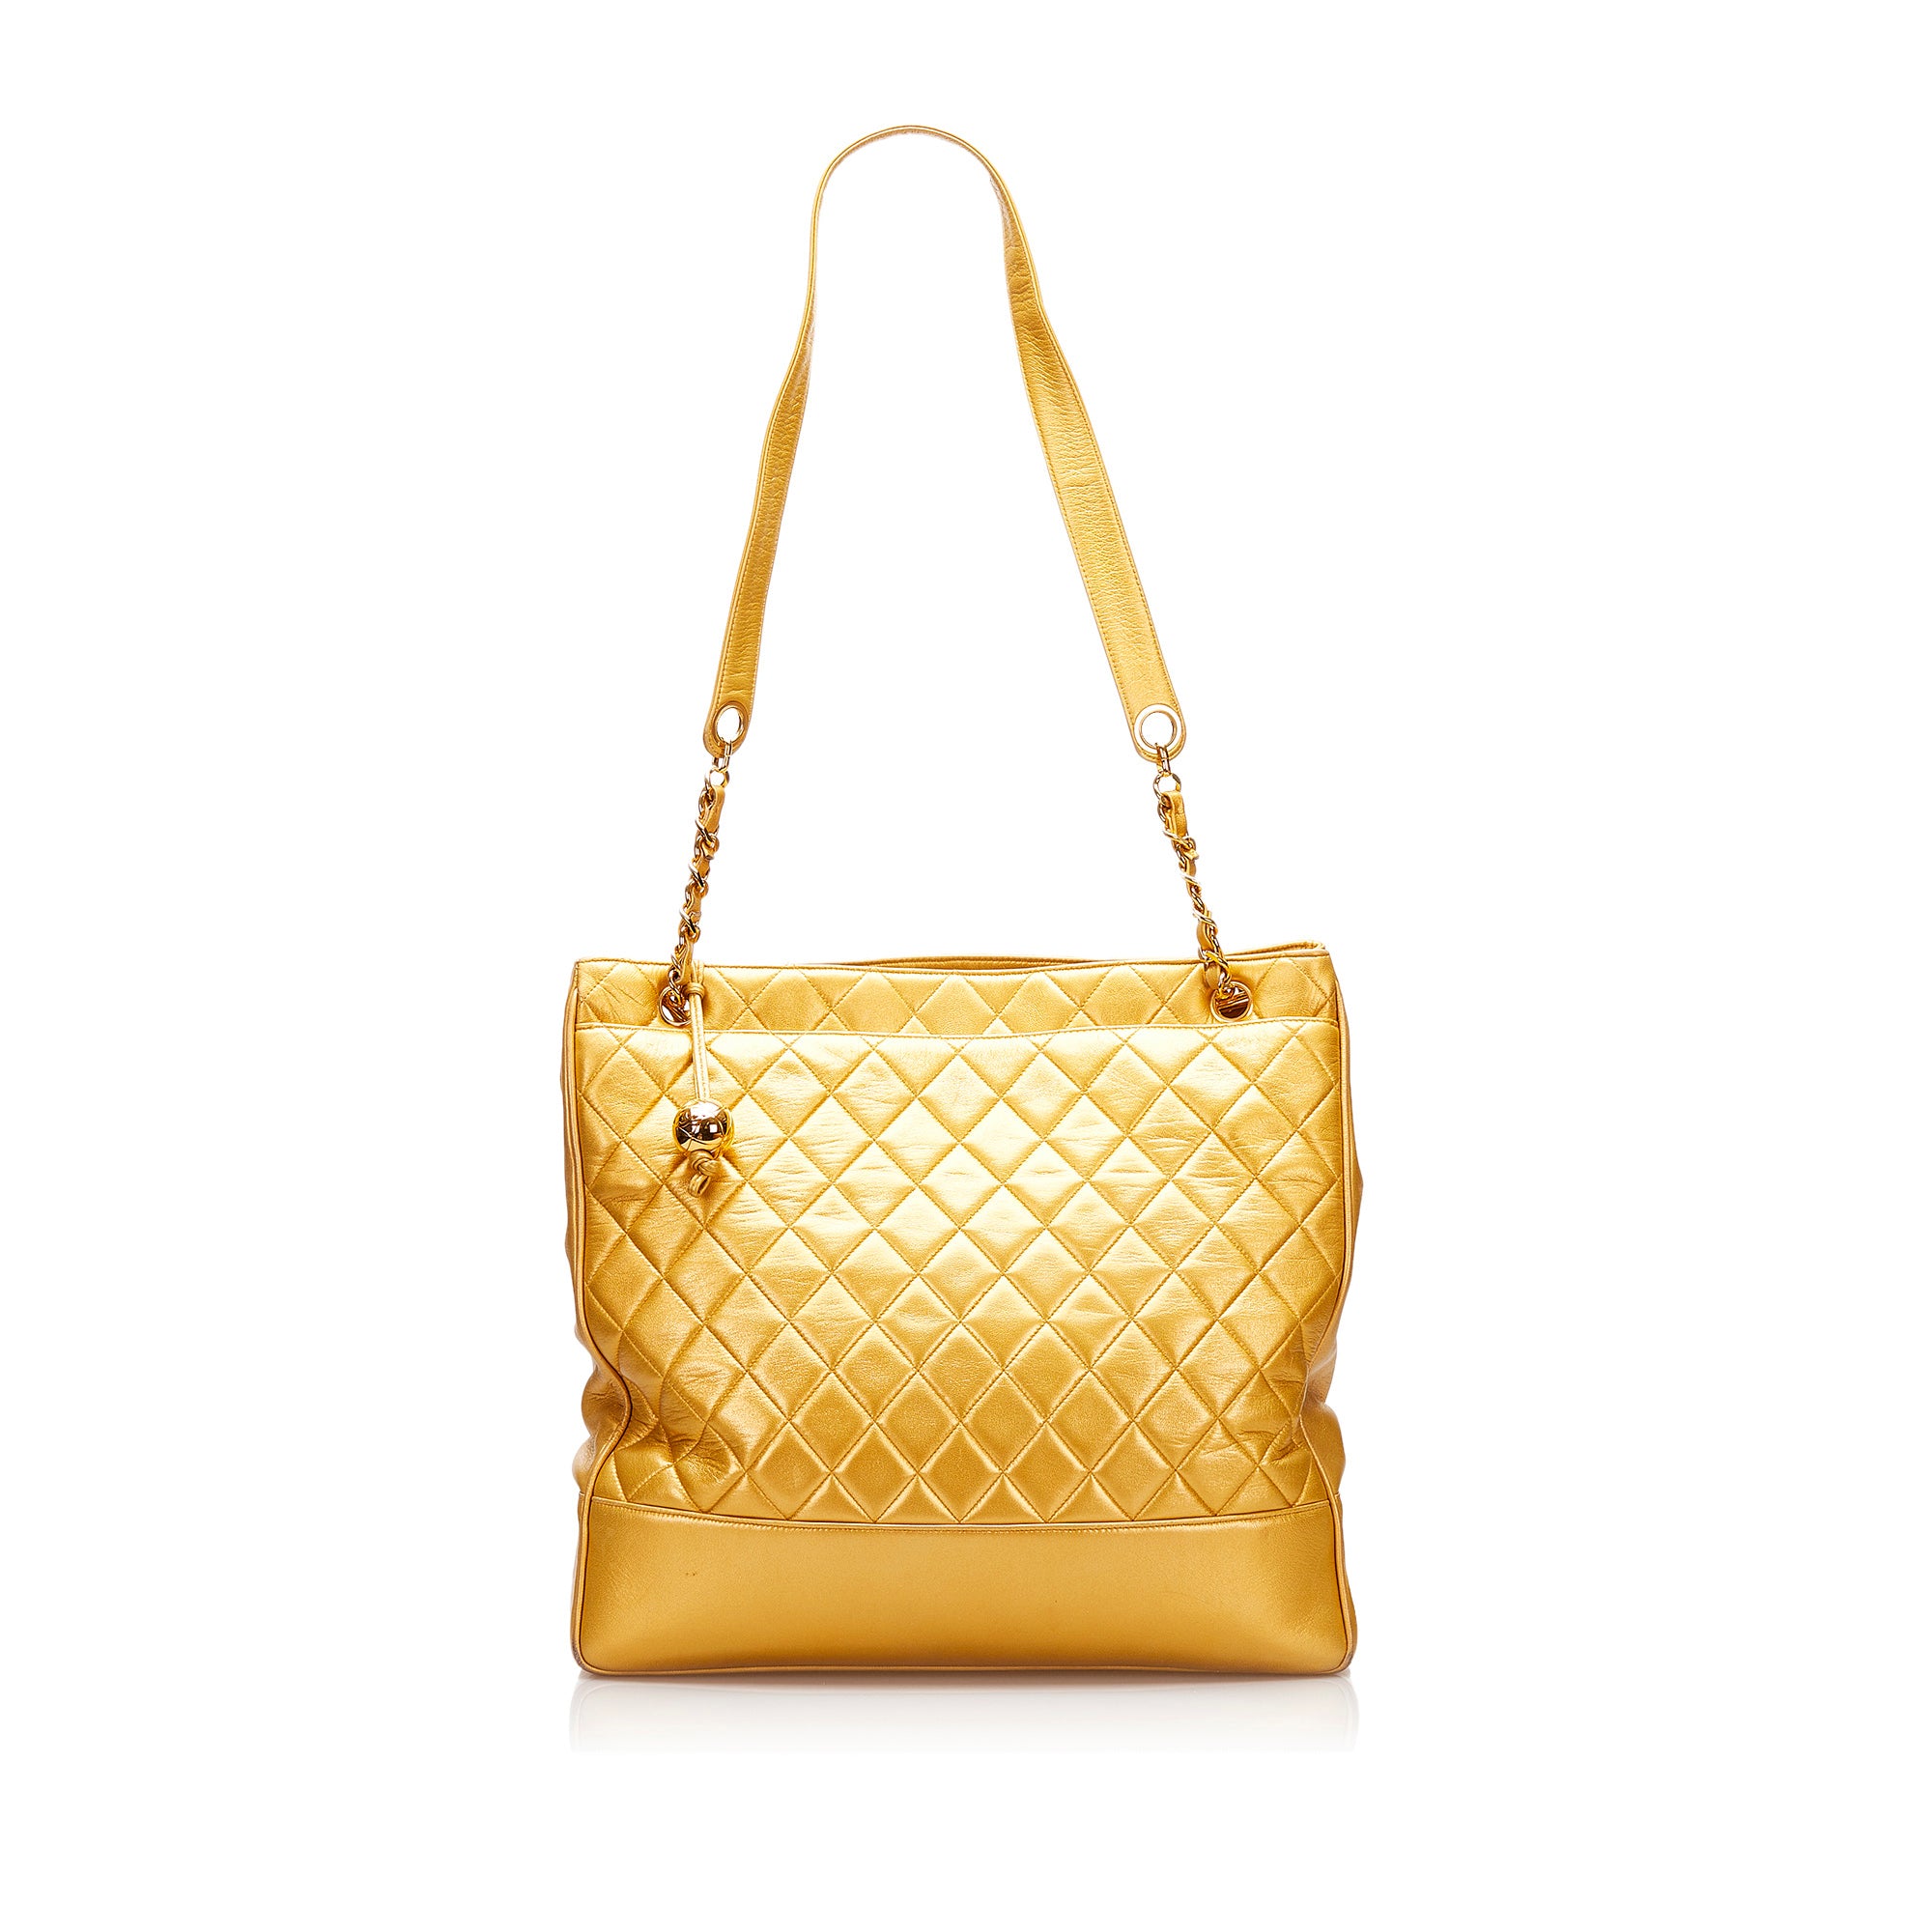 CHANEL Chanel Vintage Quilted Tote Metallic Gold - Vault 55